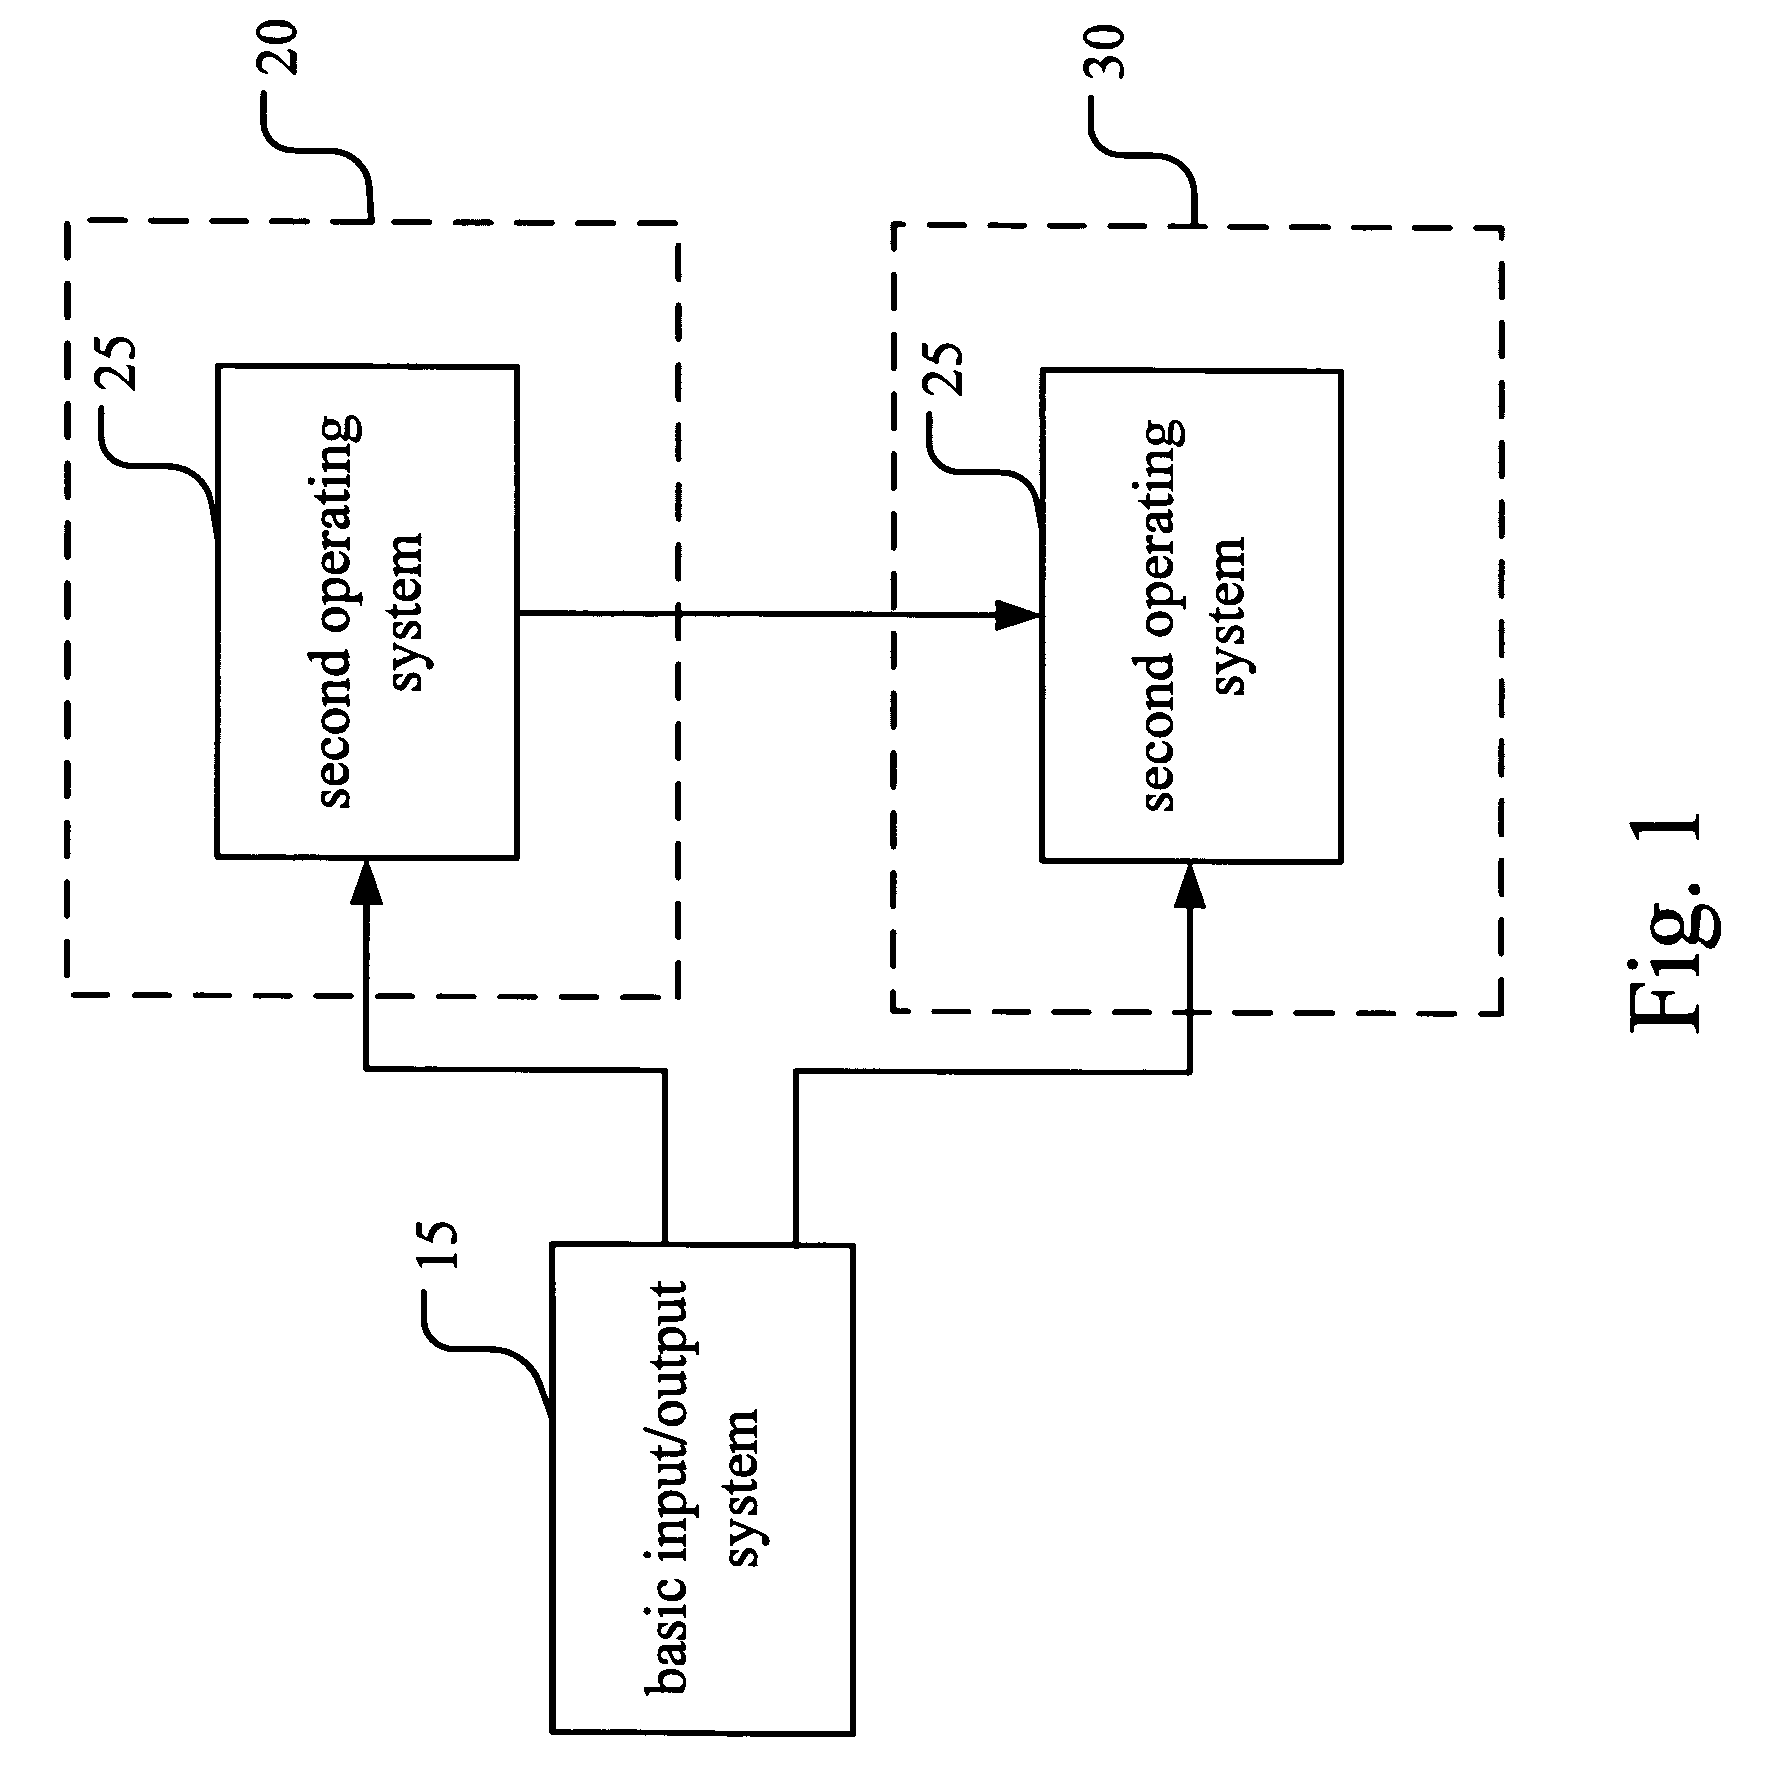 Computer architecture with multiple operating systems using a common disc partition and method for the same